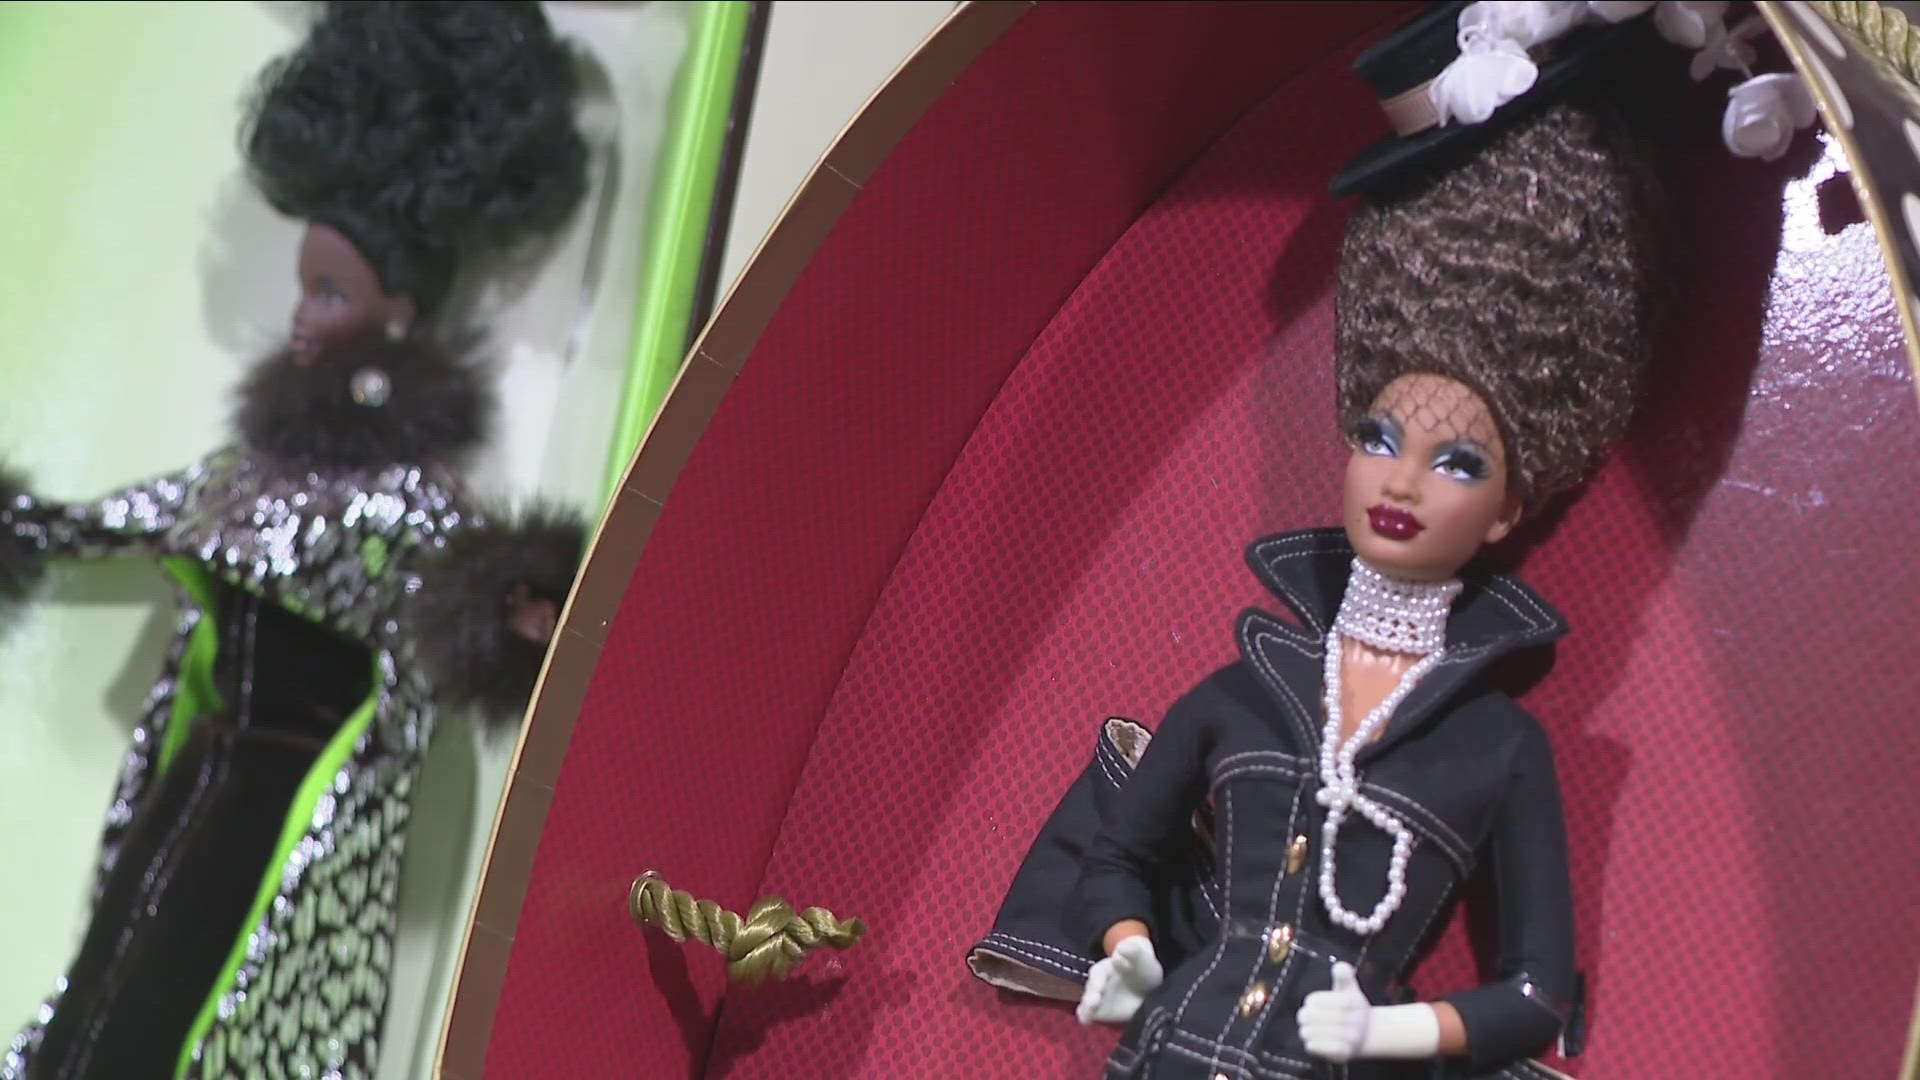 The fourth annual Black Doll Exhibit returns at the Merriweather Library for Black History Month.